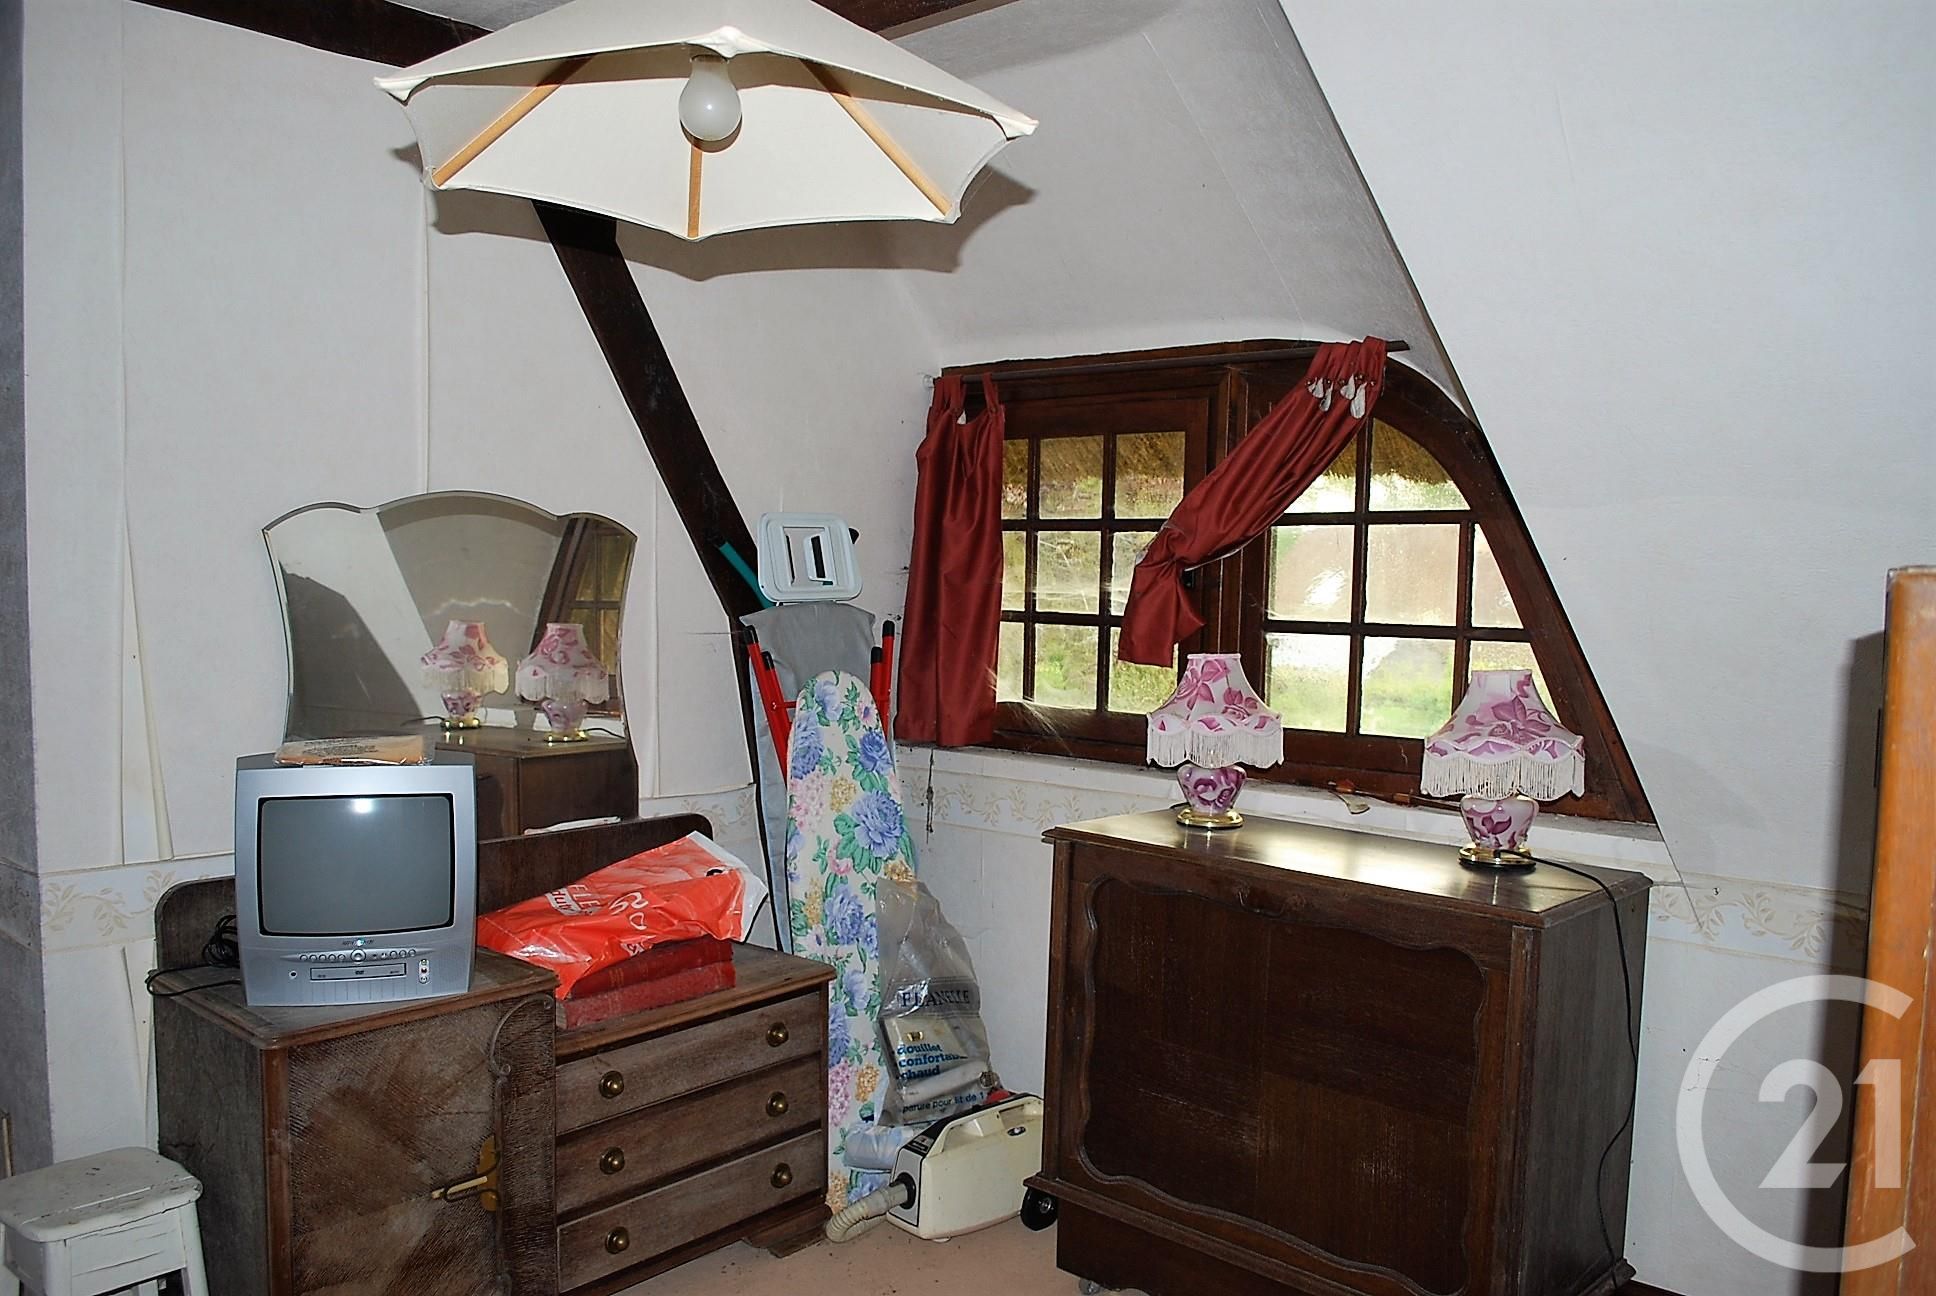 #brexit houses for sale in France, Holiday home in France, vacation home in France, retire in France, Property for sale in France, Gites in France, stone barn for sale in France, restore old barn in France, retire in France, cheap property for sale in France #rénovation #restauration #houseinfrance #renovering #fönsterluckor #house #fromage #francelovers #southoffrance #renovationproject #maison #fromages #frenchfood #france #cheeselover #renoveringsprojekt #travelposter #livingfrance #fromagefrancais #frenchcountrylife #cuisine #castlefrance #chateau #france #ostrzycki #napoleon #moyenage #iledefrance #histoiredefrance #oldcastle #monumentshistoriques #historiafrancji #histoire #renaissance #musee #louisxiv #historia #castle #globetrotter #château #chaumière #colombages #construction #renovation #extension #decoration #deco #travaux #bricolage #brico #hardwork #maison #home #homesweethome #MaisonAVendre 